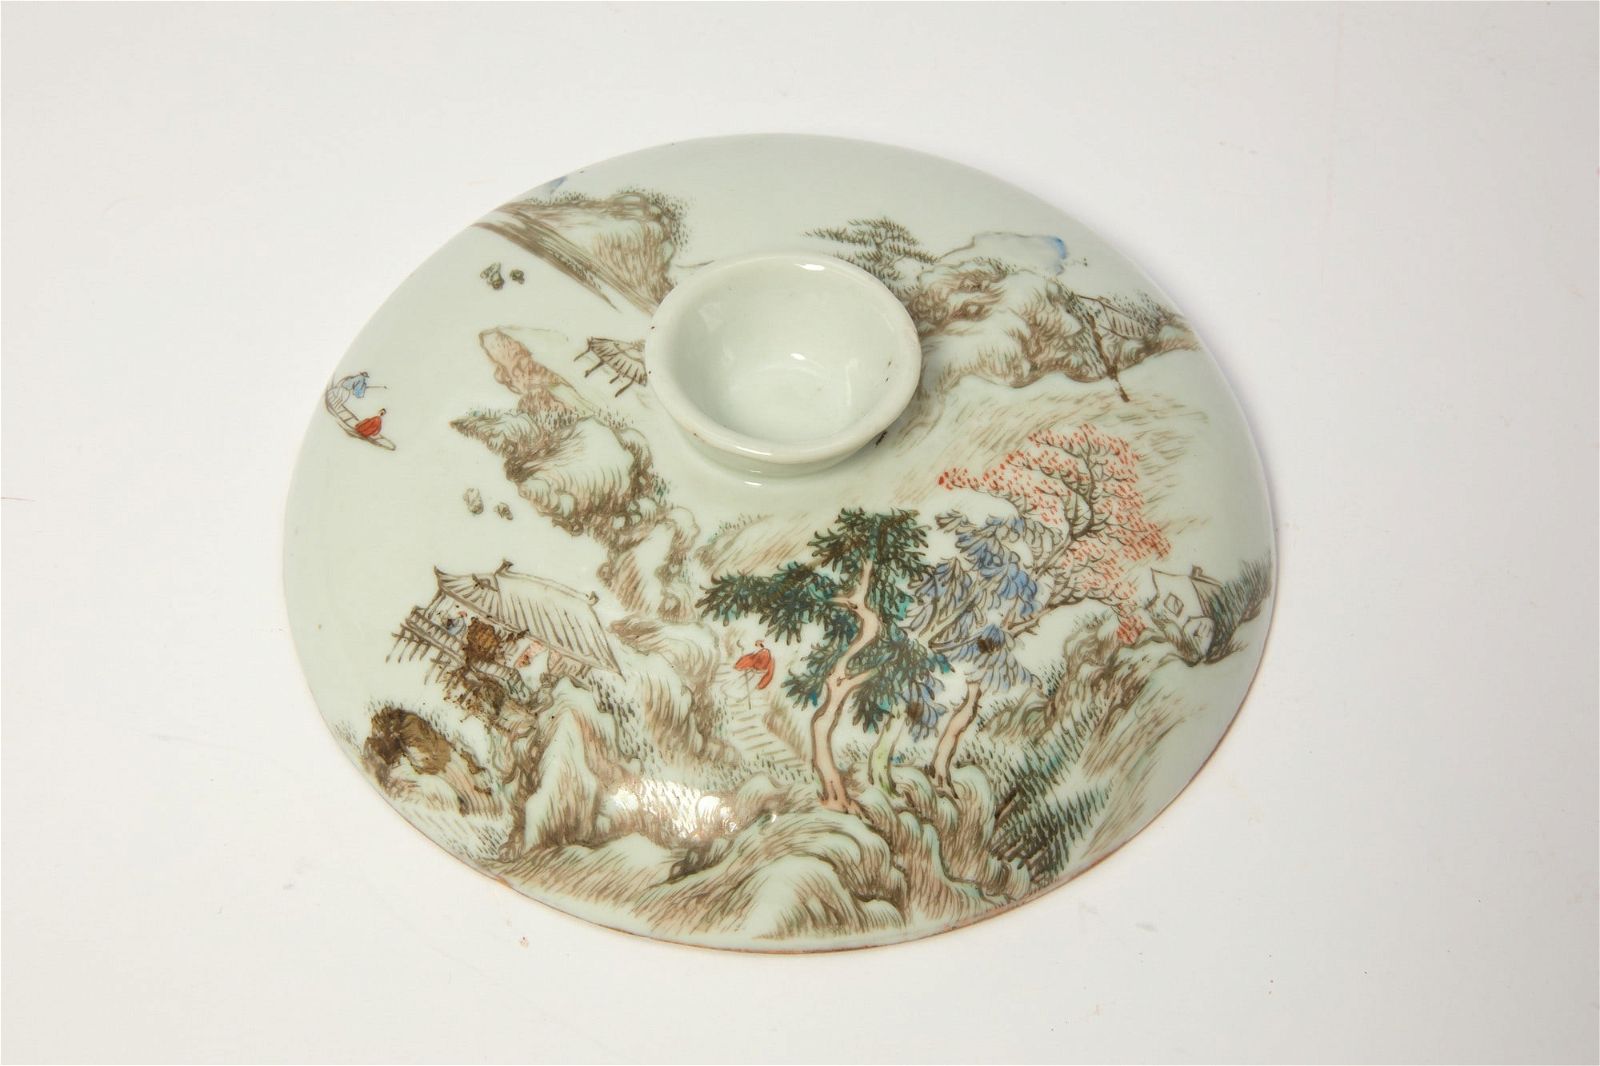 A CHINESE EXPORT FAMILLE ROSE PORCELAIN